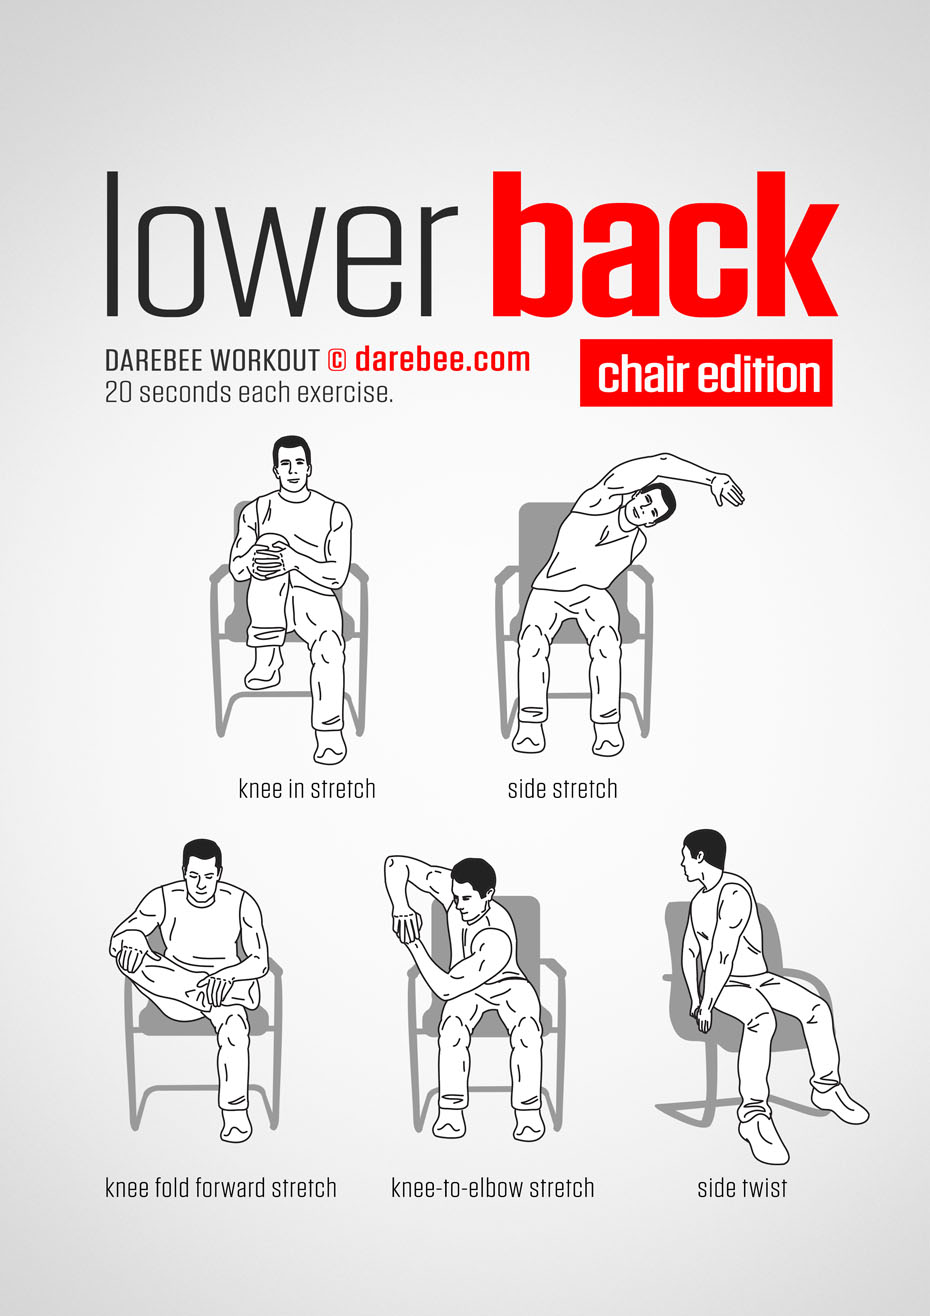 Best Lower Back Workouts - The Barbell